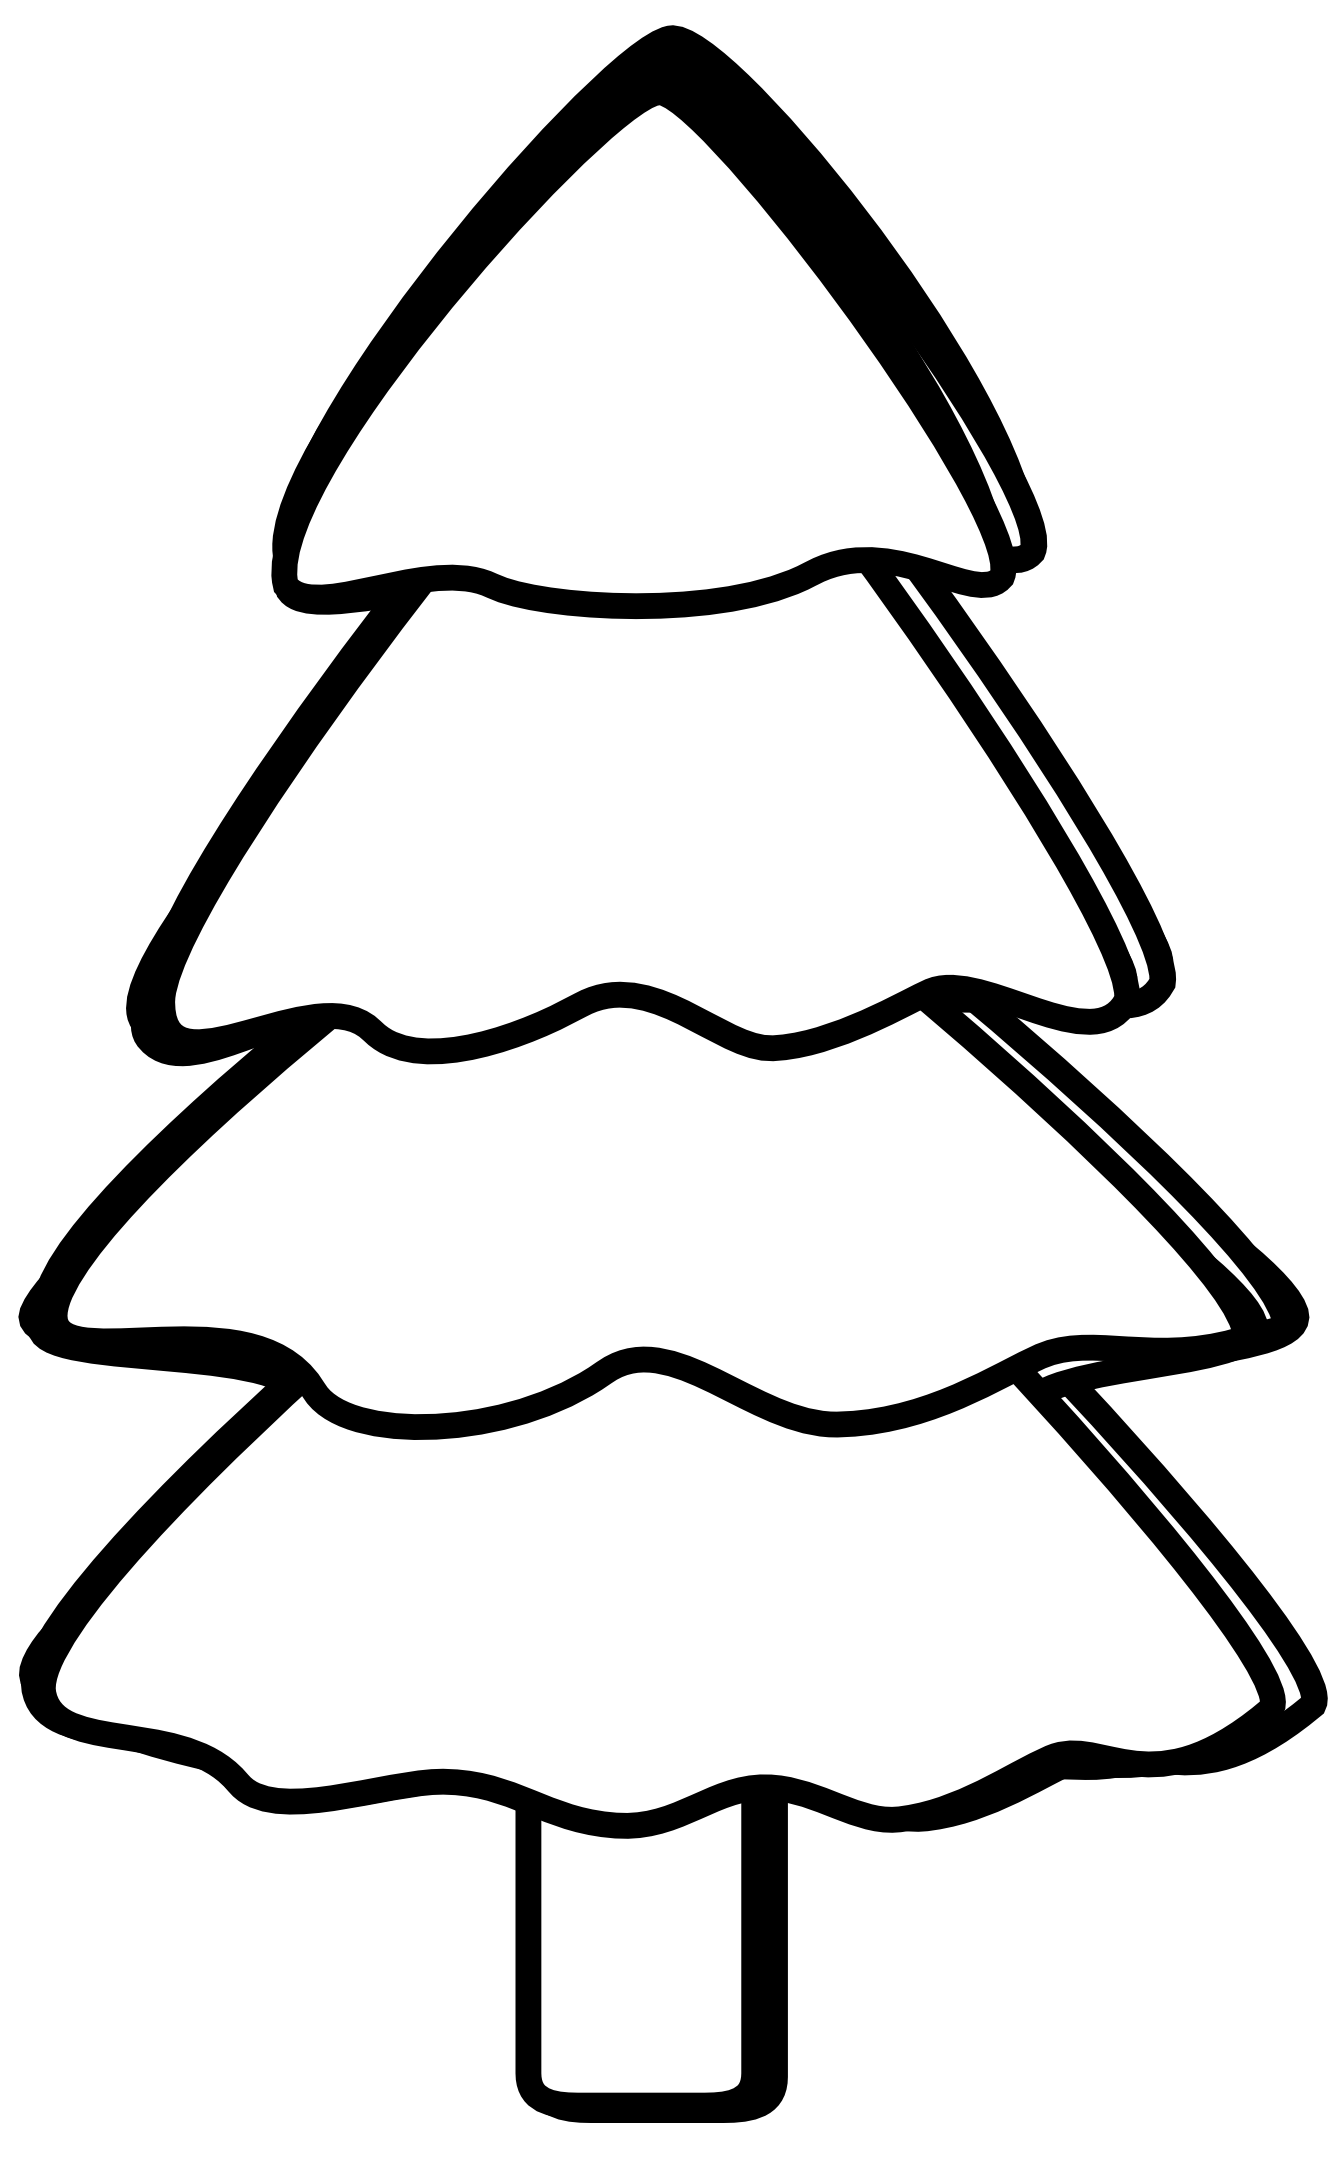 clipart tree black and white - photo #23